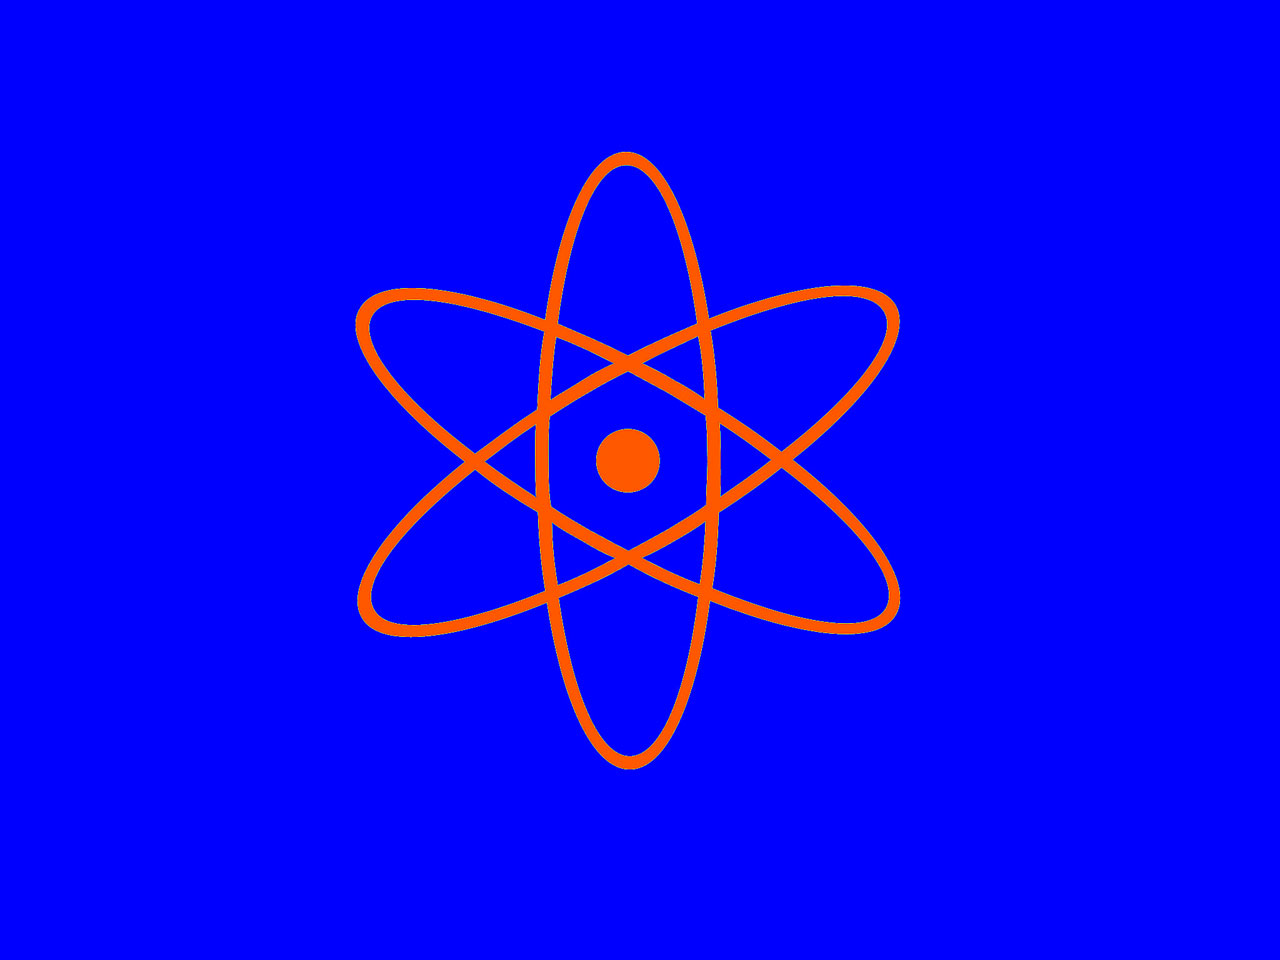 This signs depicts Nuclear activity 